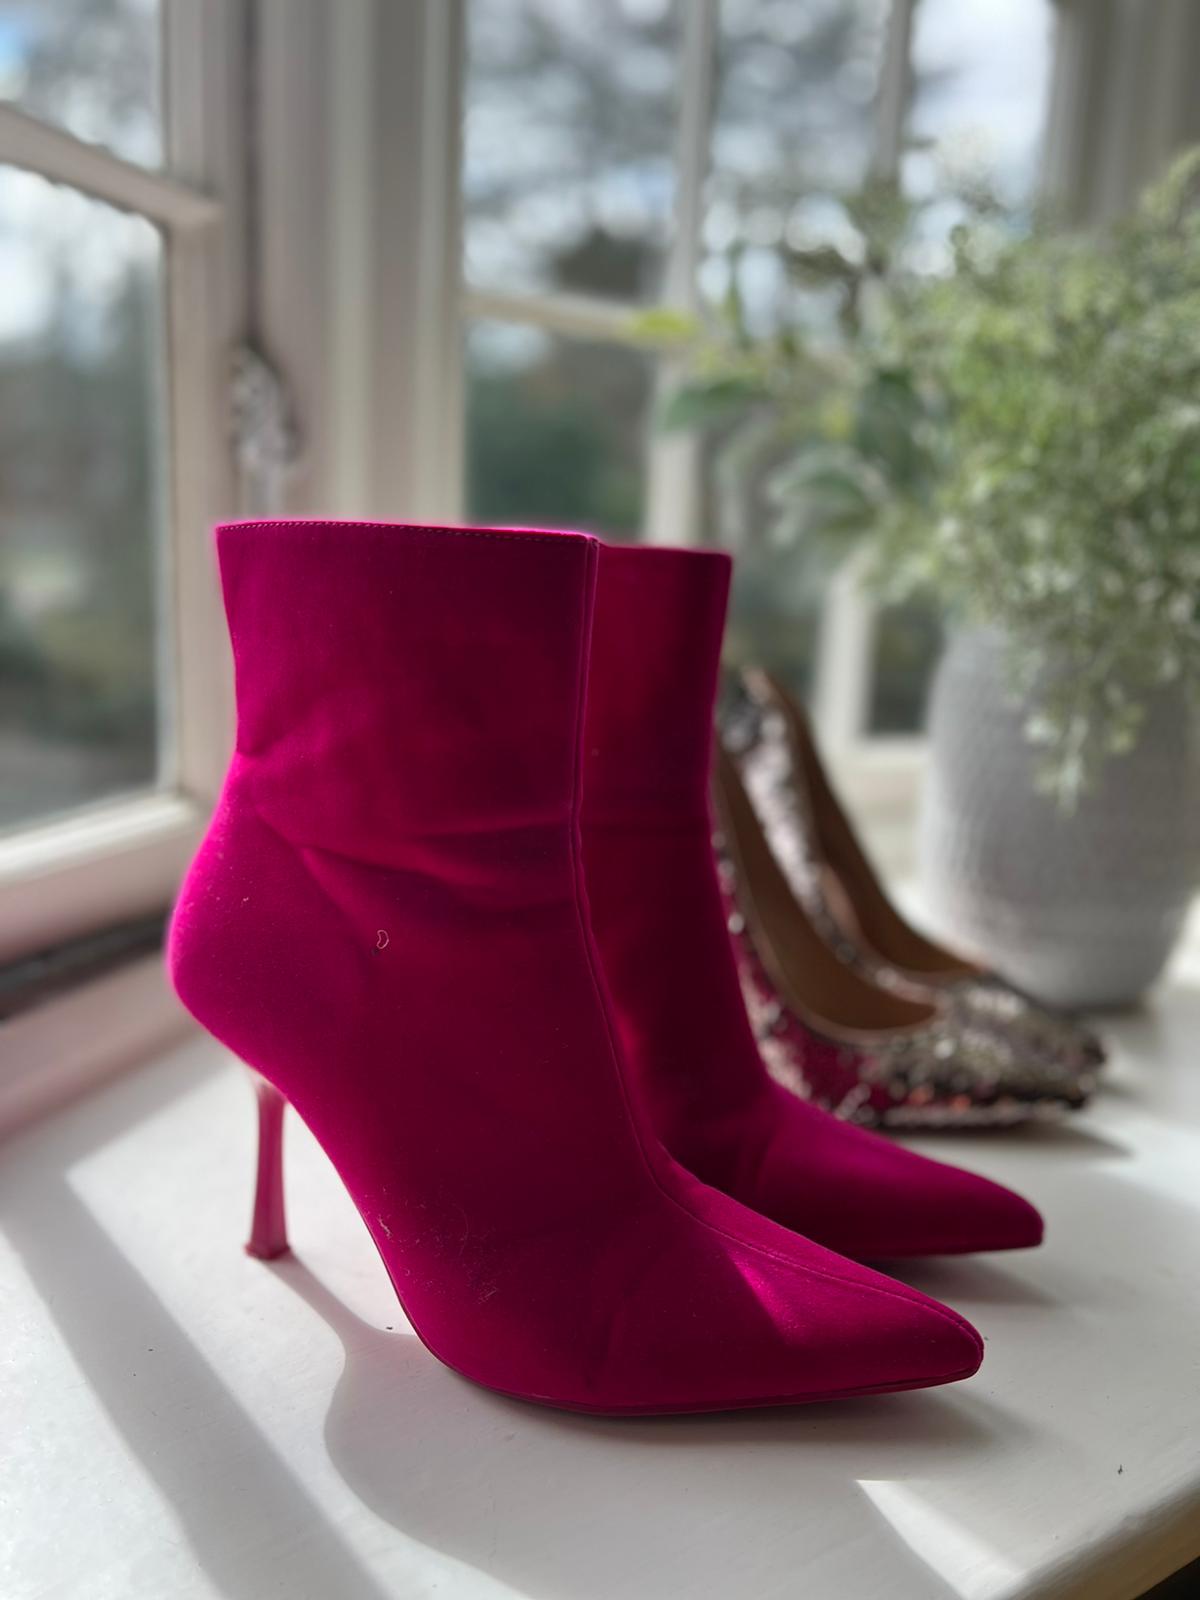 Pre-loved Pink Faux Suede High Heel Boots Size 4